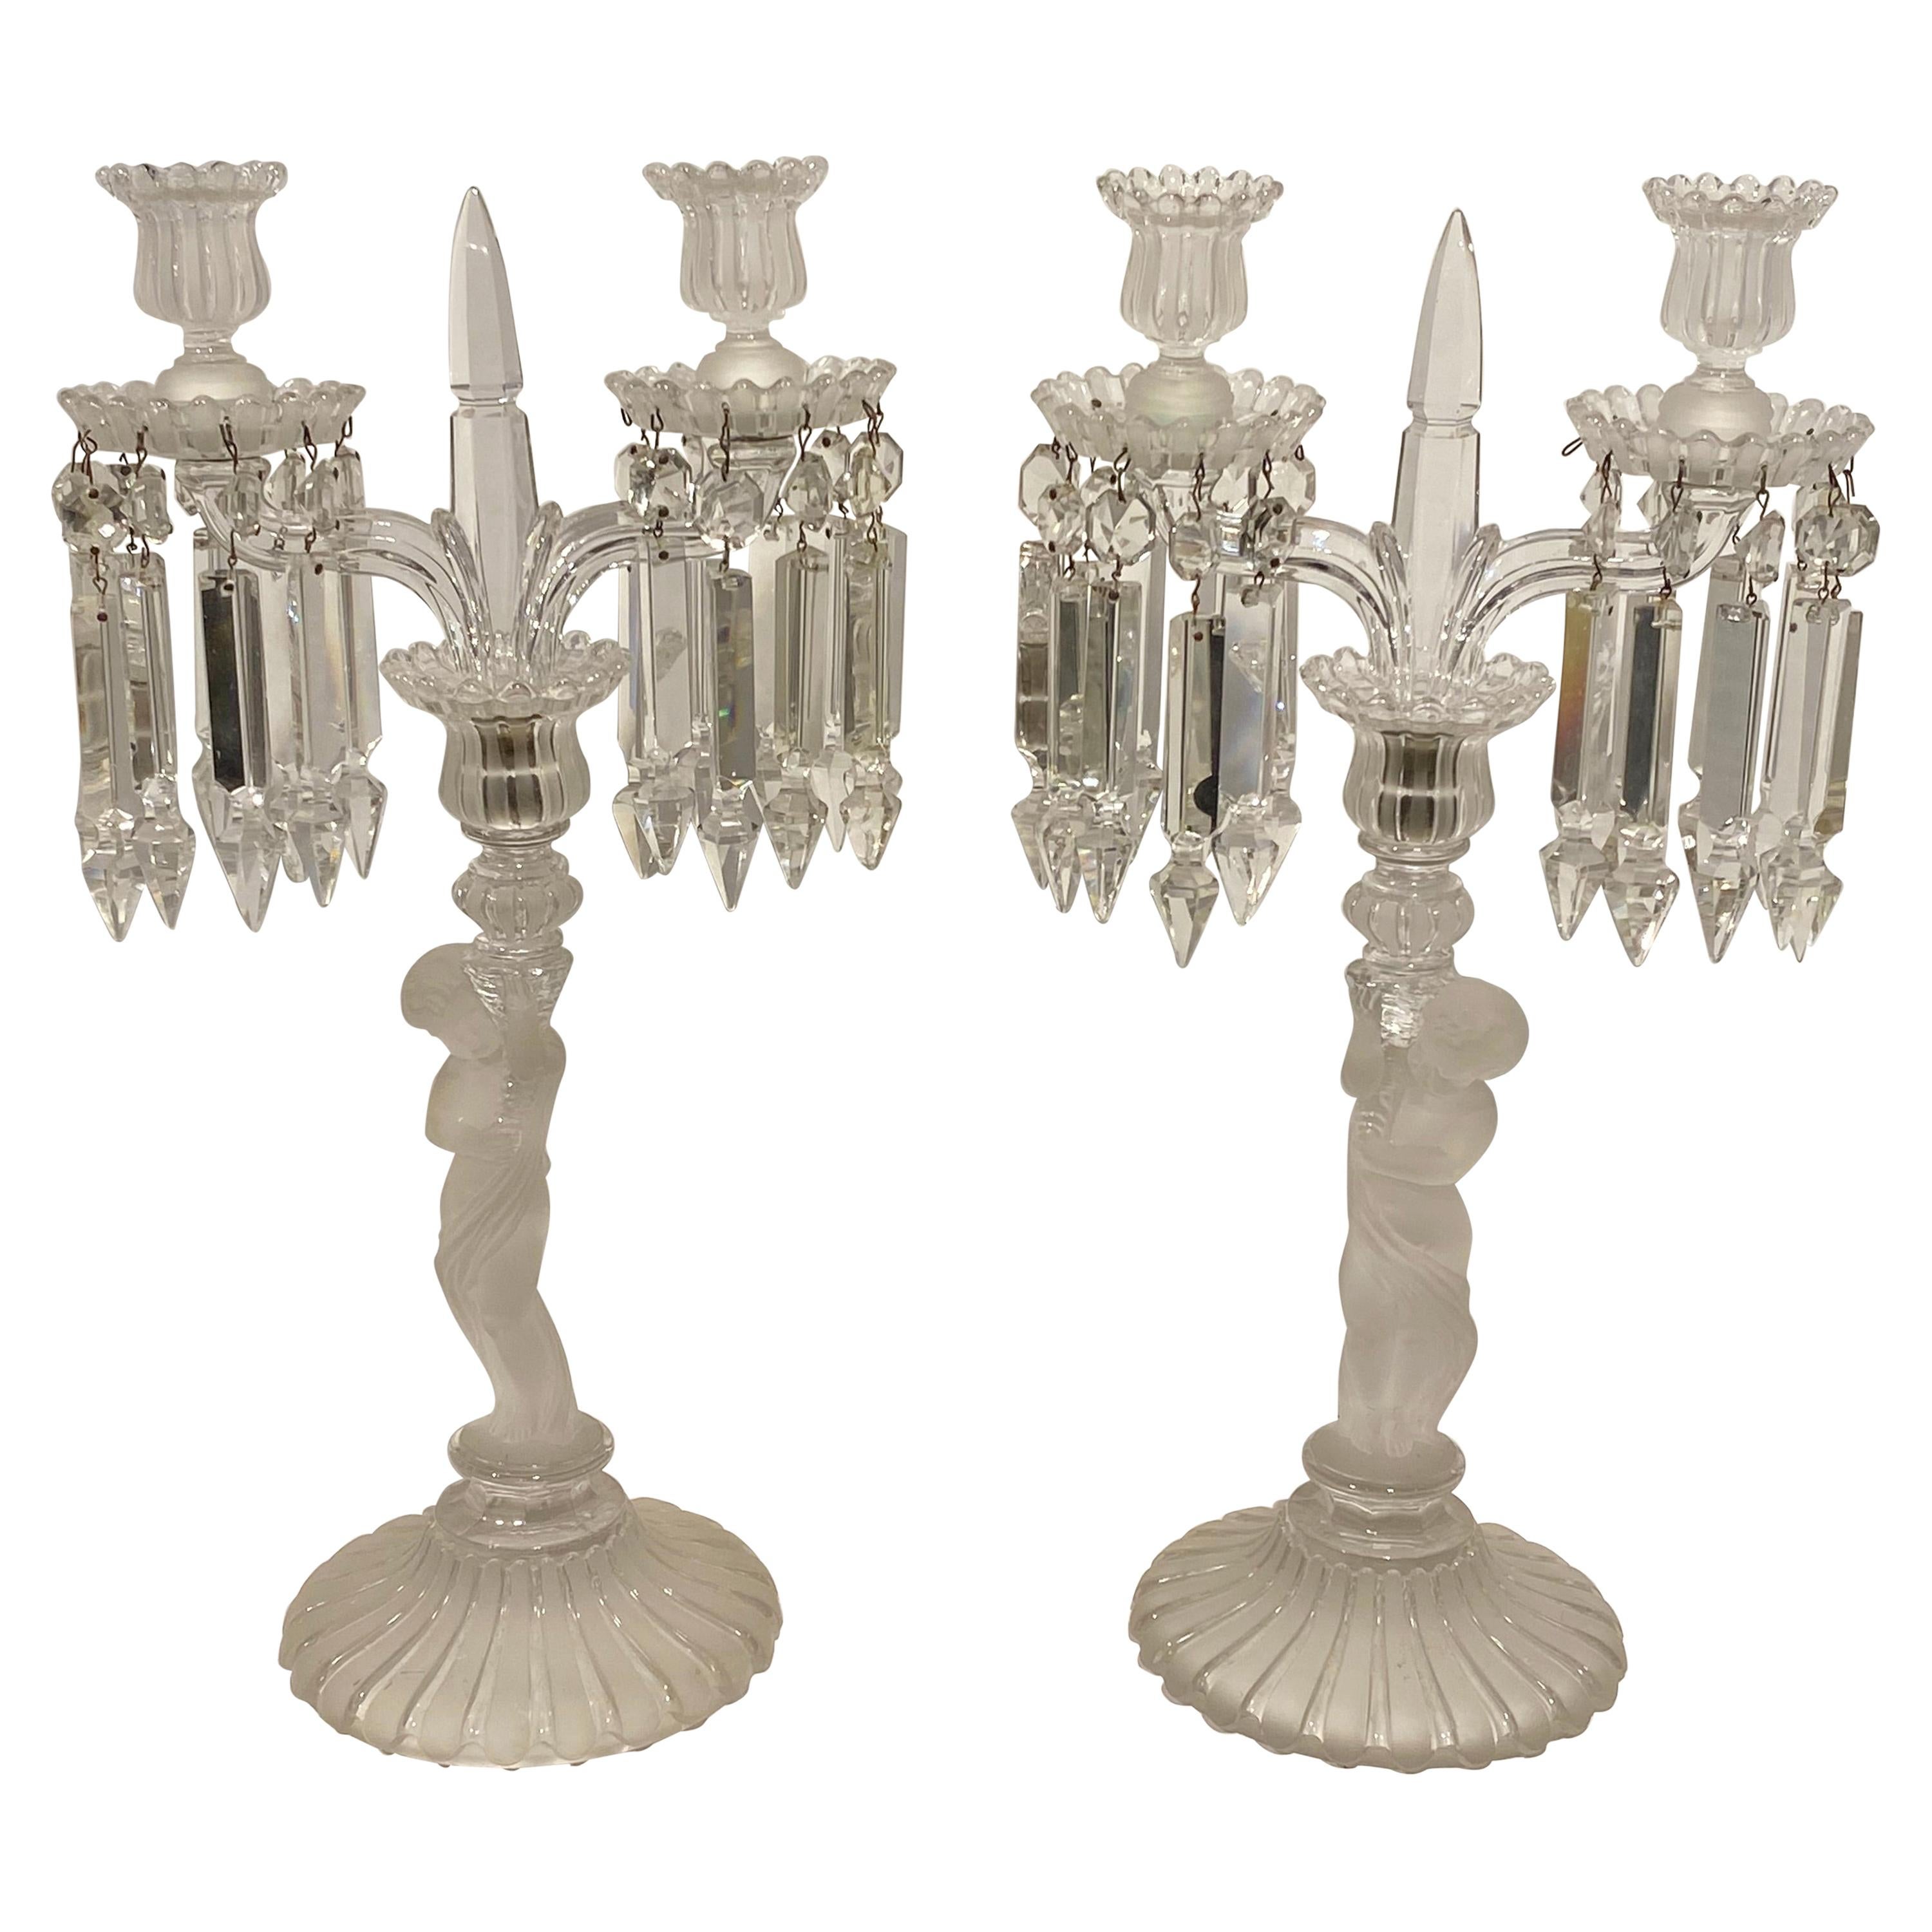 Pair of Baccarat Two-Light Frosted Glass Figural Candelabras